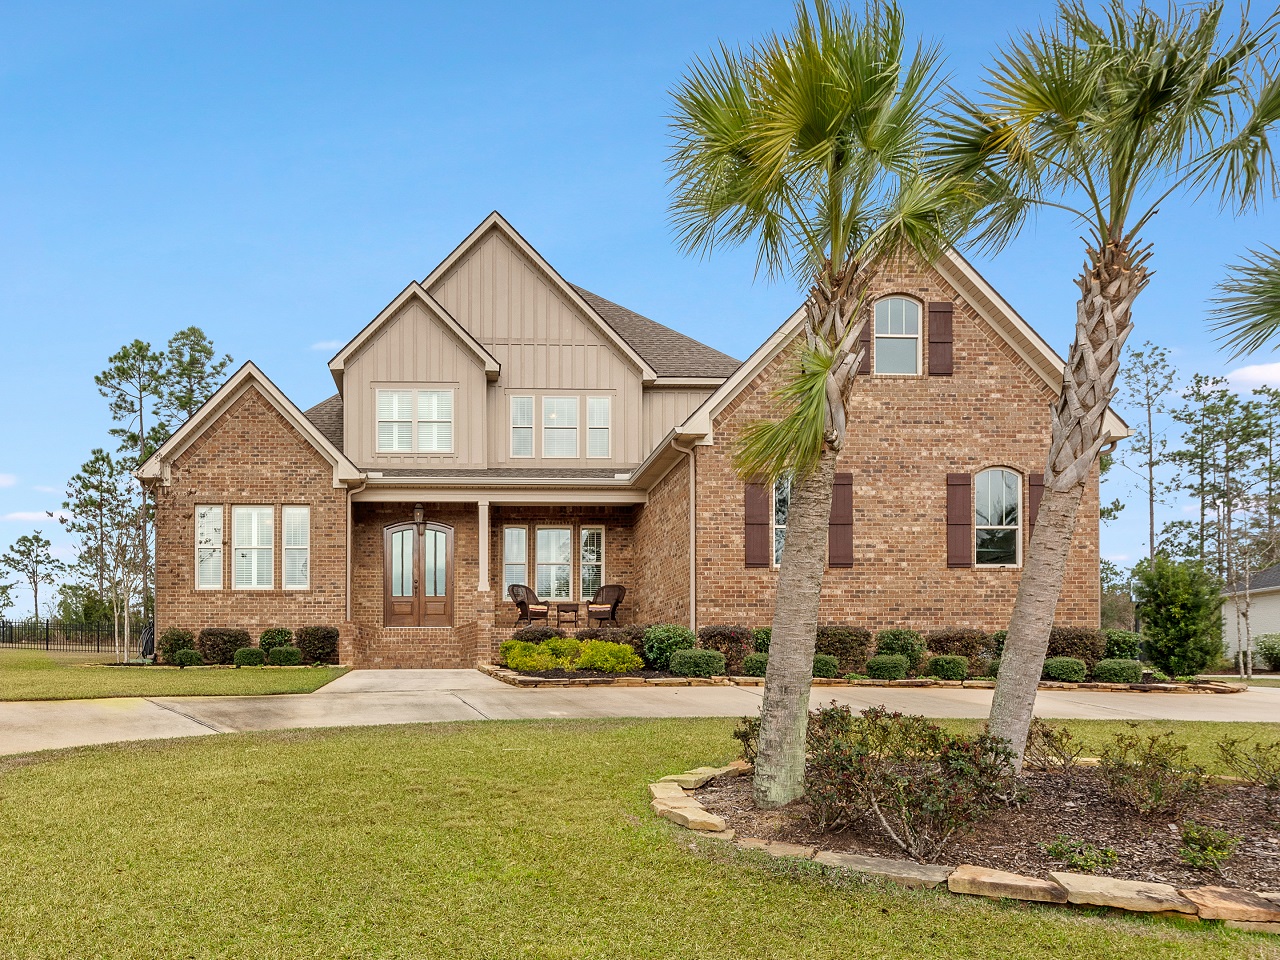 32580 Whimbret Way ~ Spanish Fort, AL